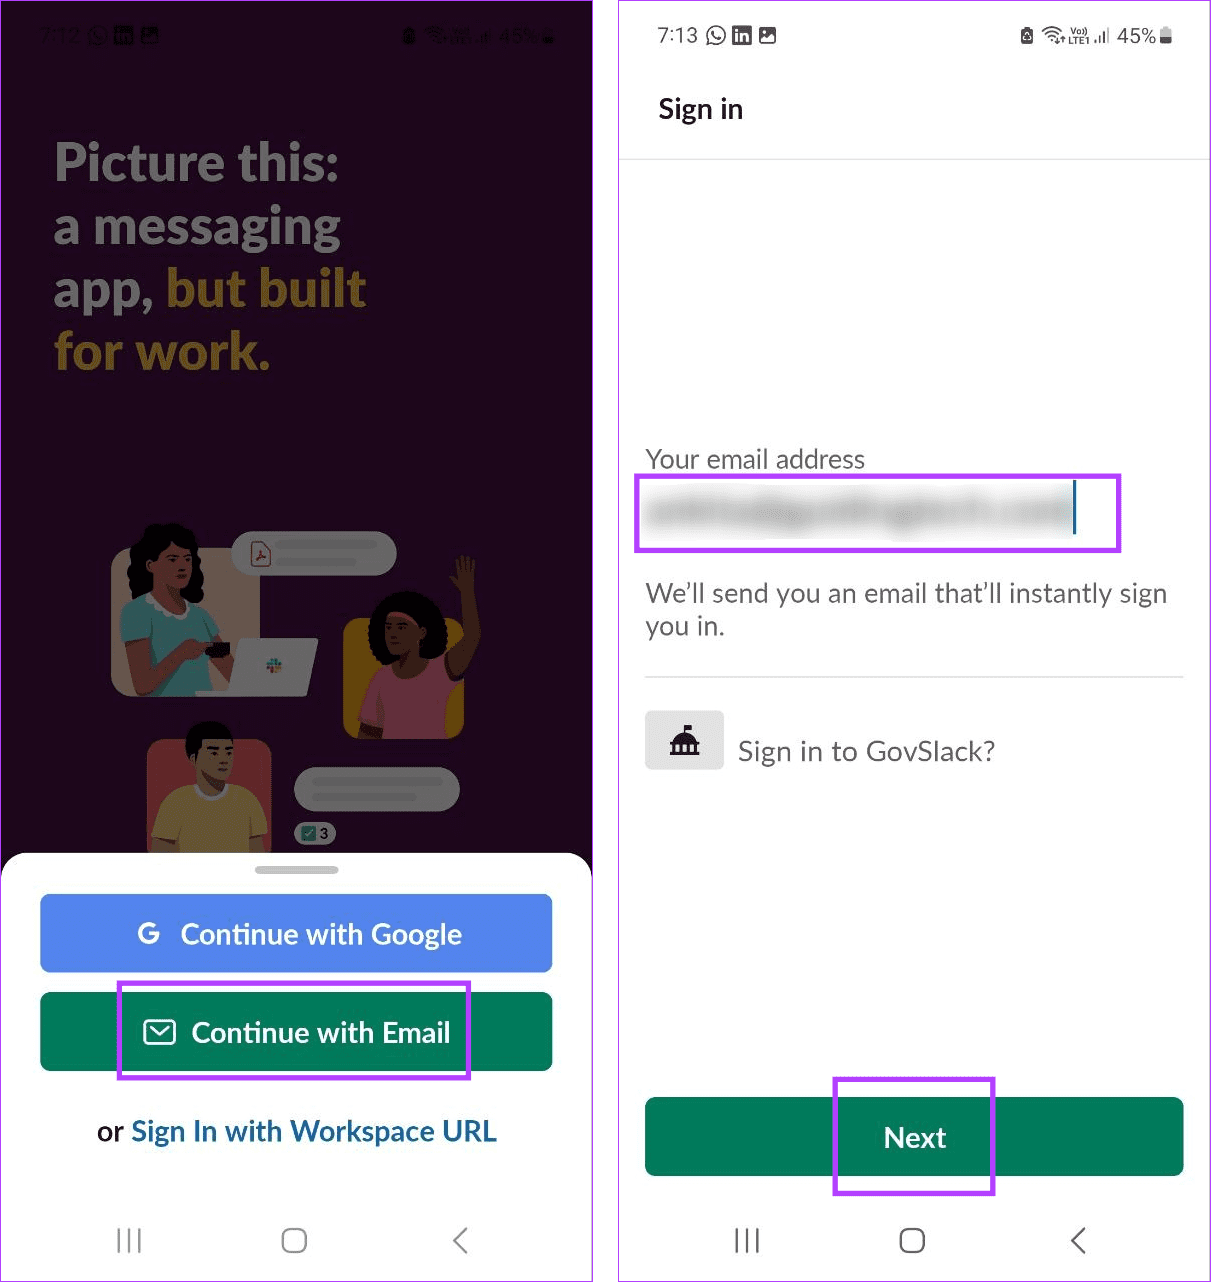 Send sign in email from Slack